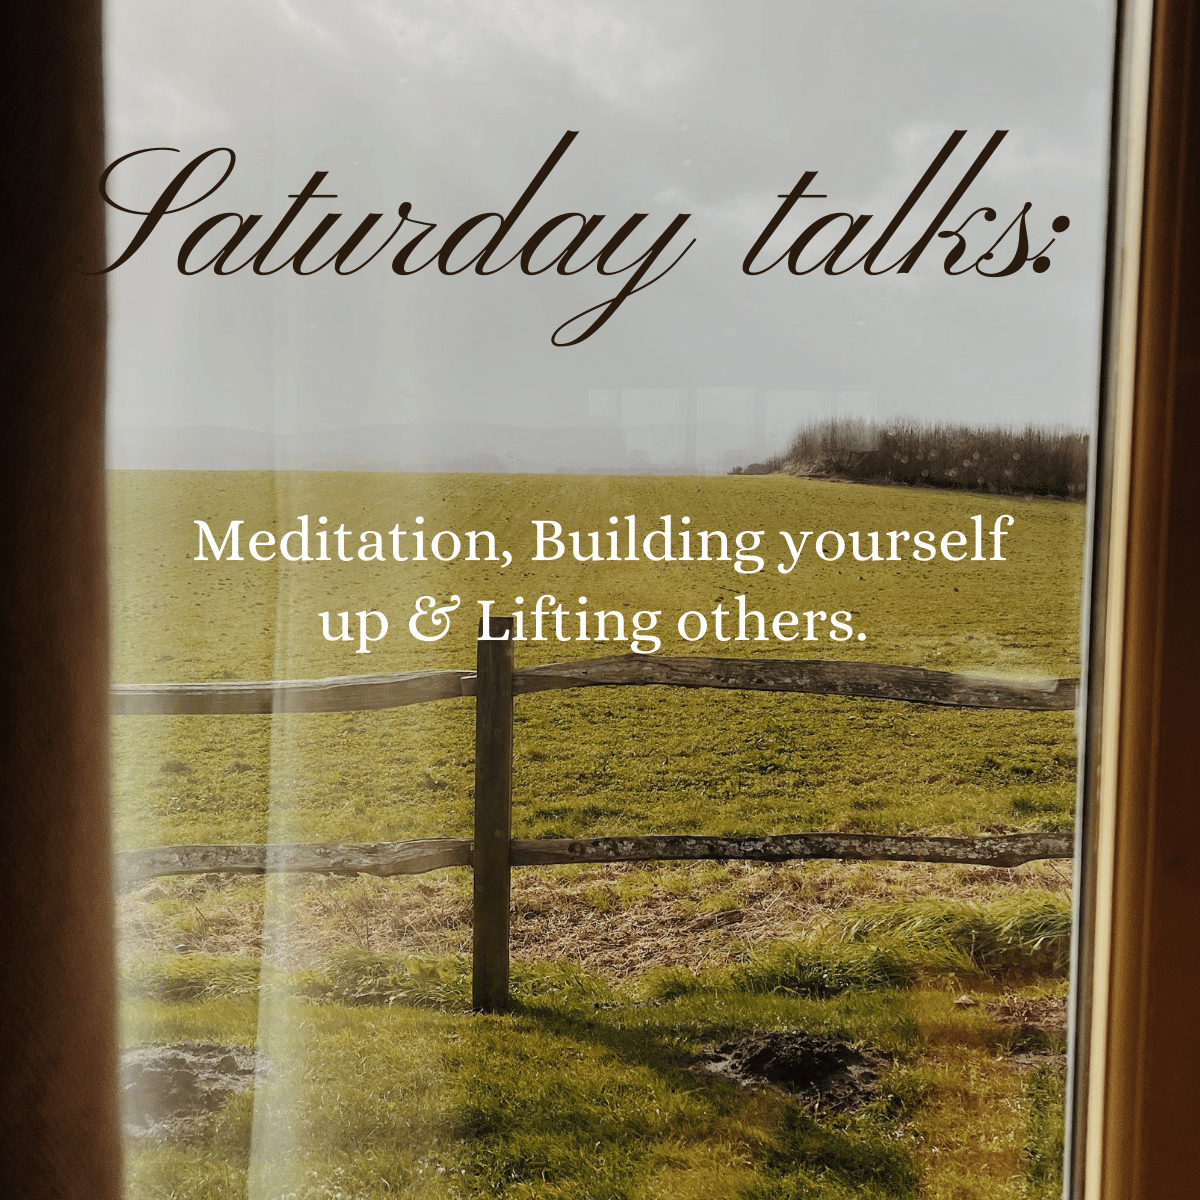 Saturday talks: Meditation, Building yourself up & Lifting others.